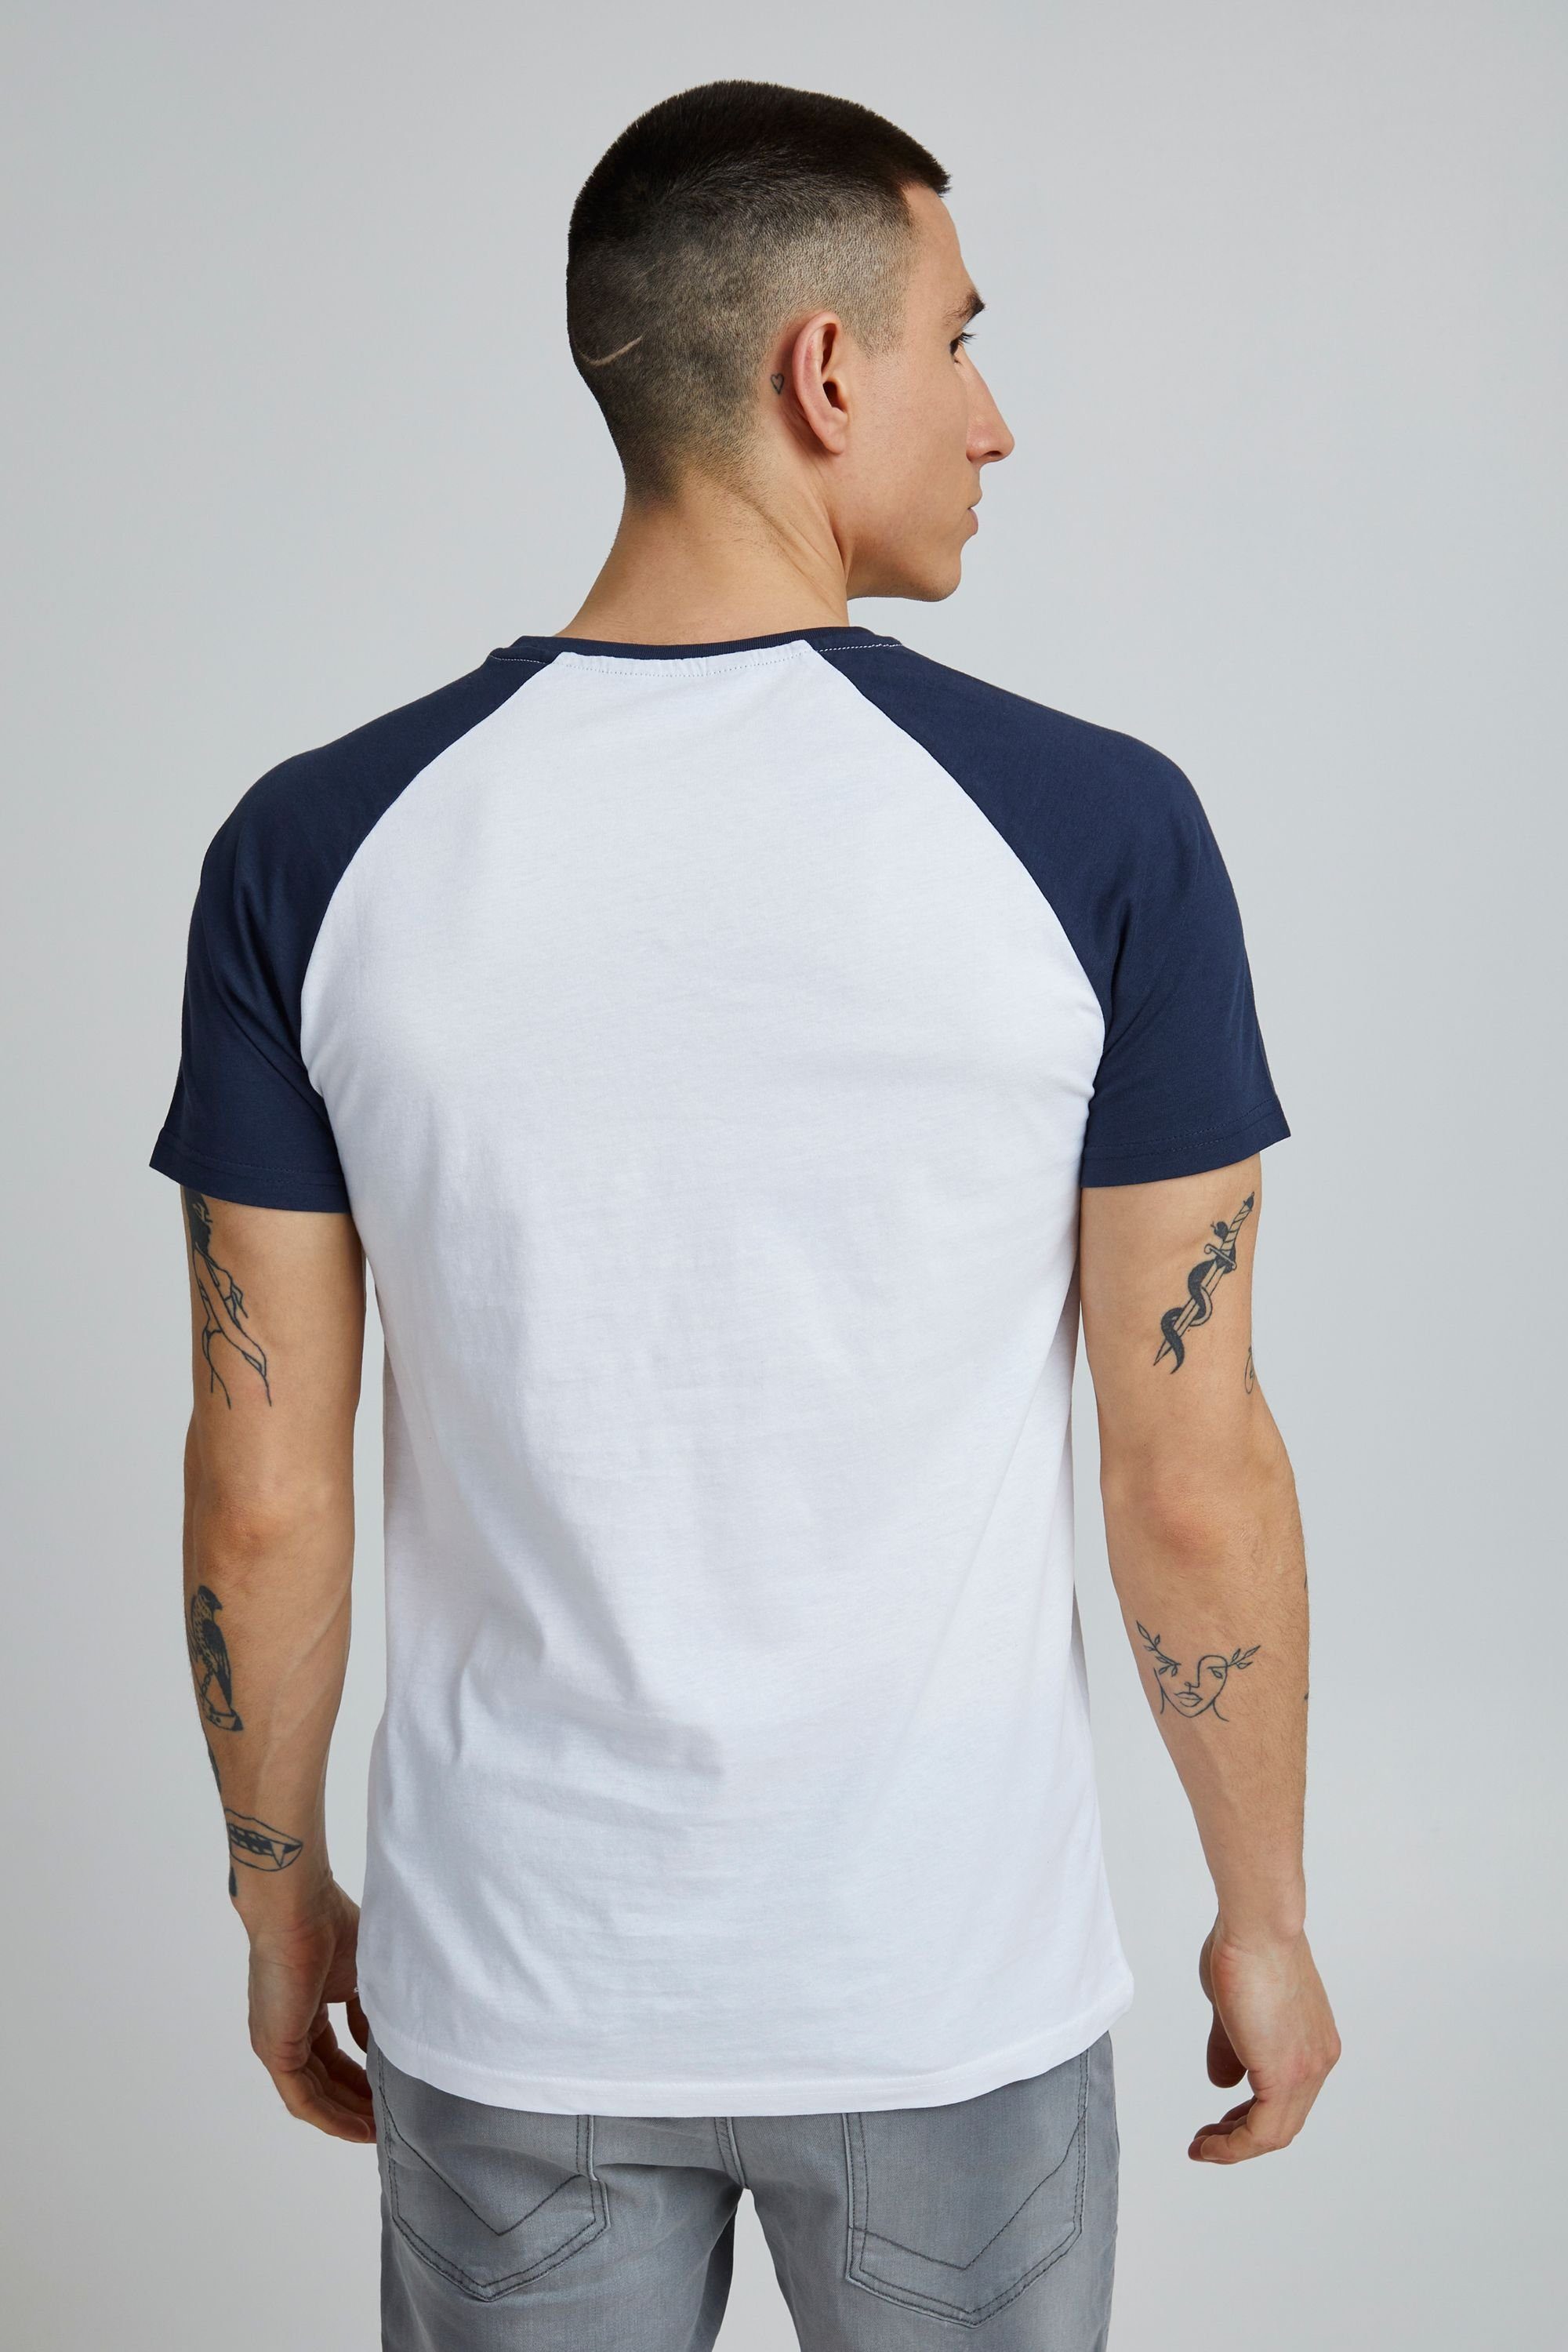 Project White Project T-Shirt 11 11 PRBo